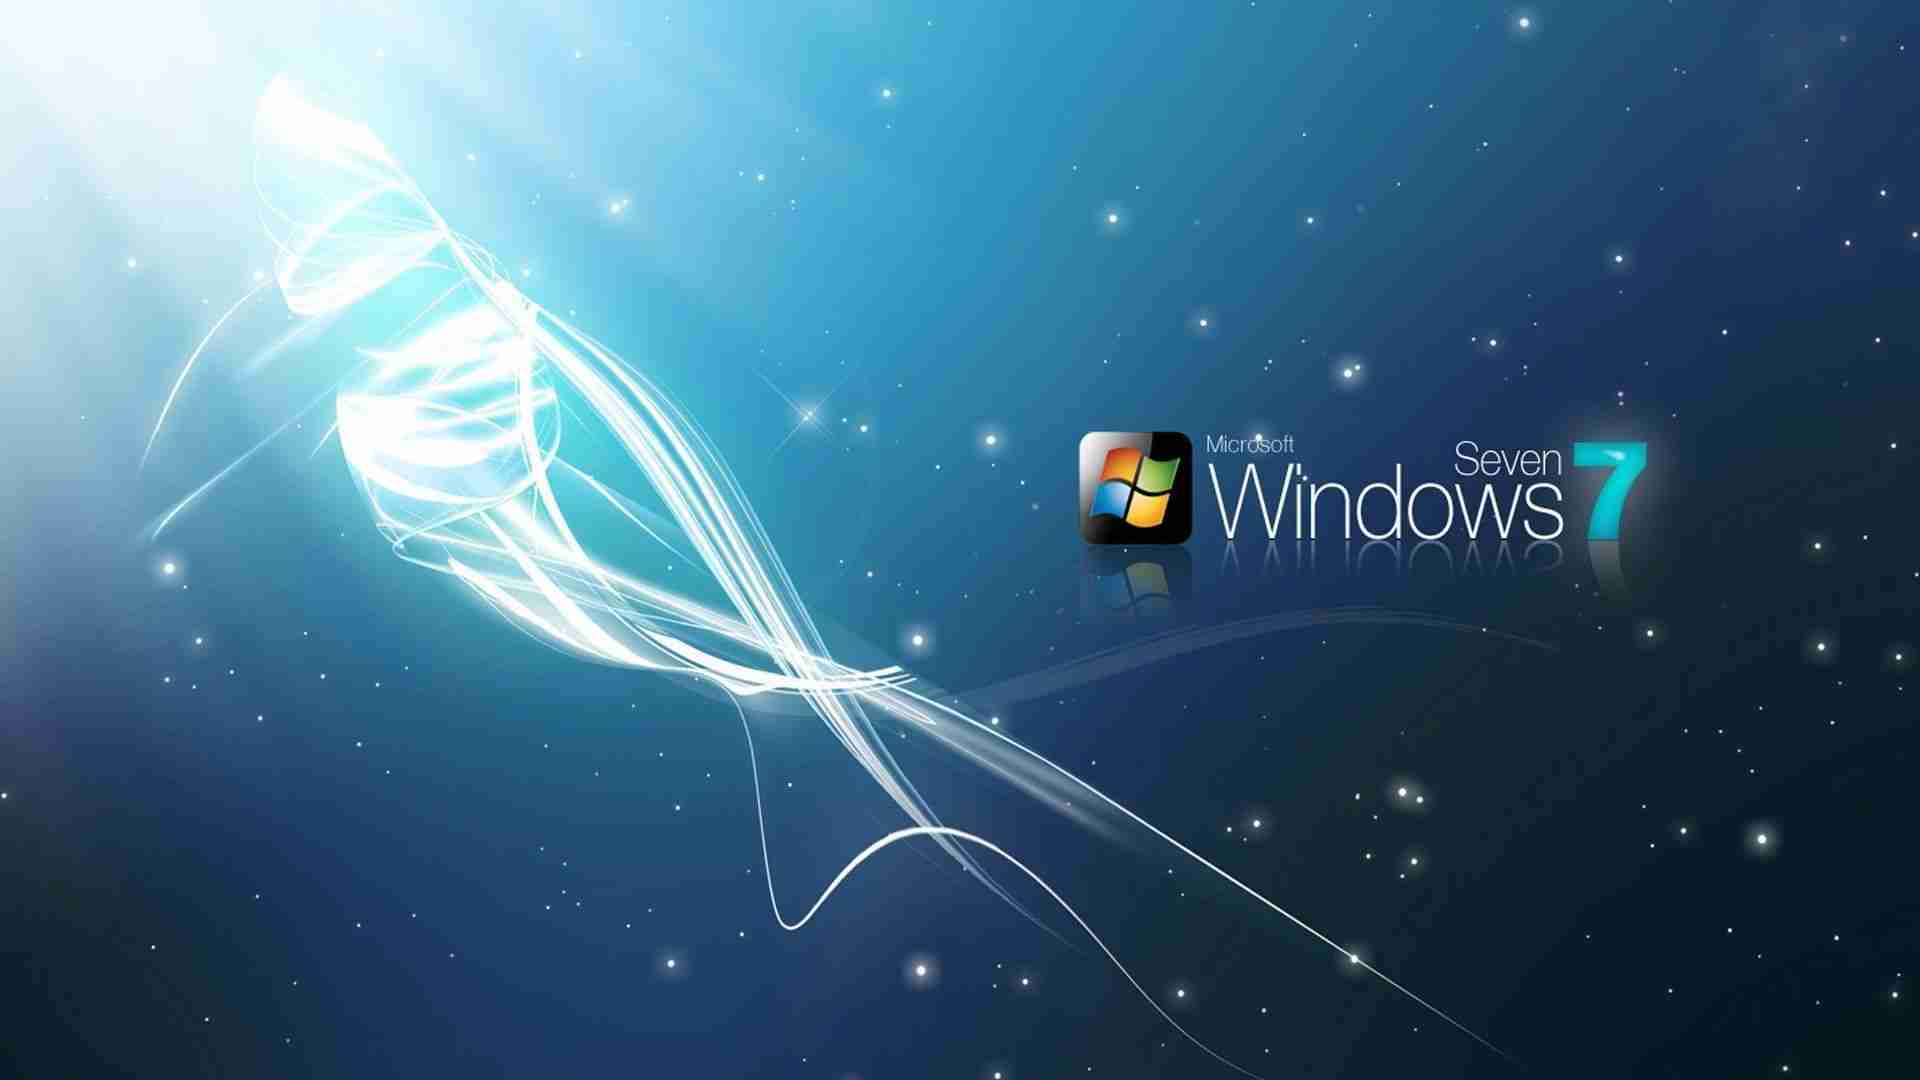 37 High Definition Windows 7 Wallpapers/Backgrounds For Free Download